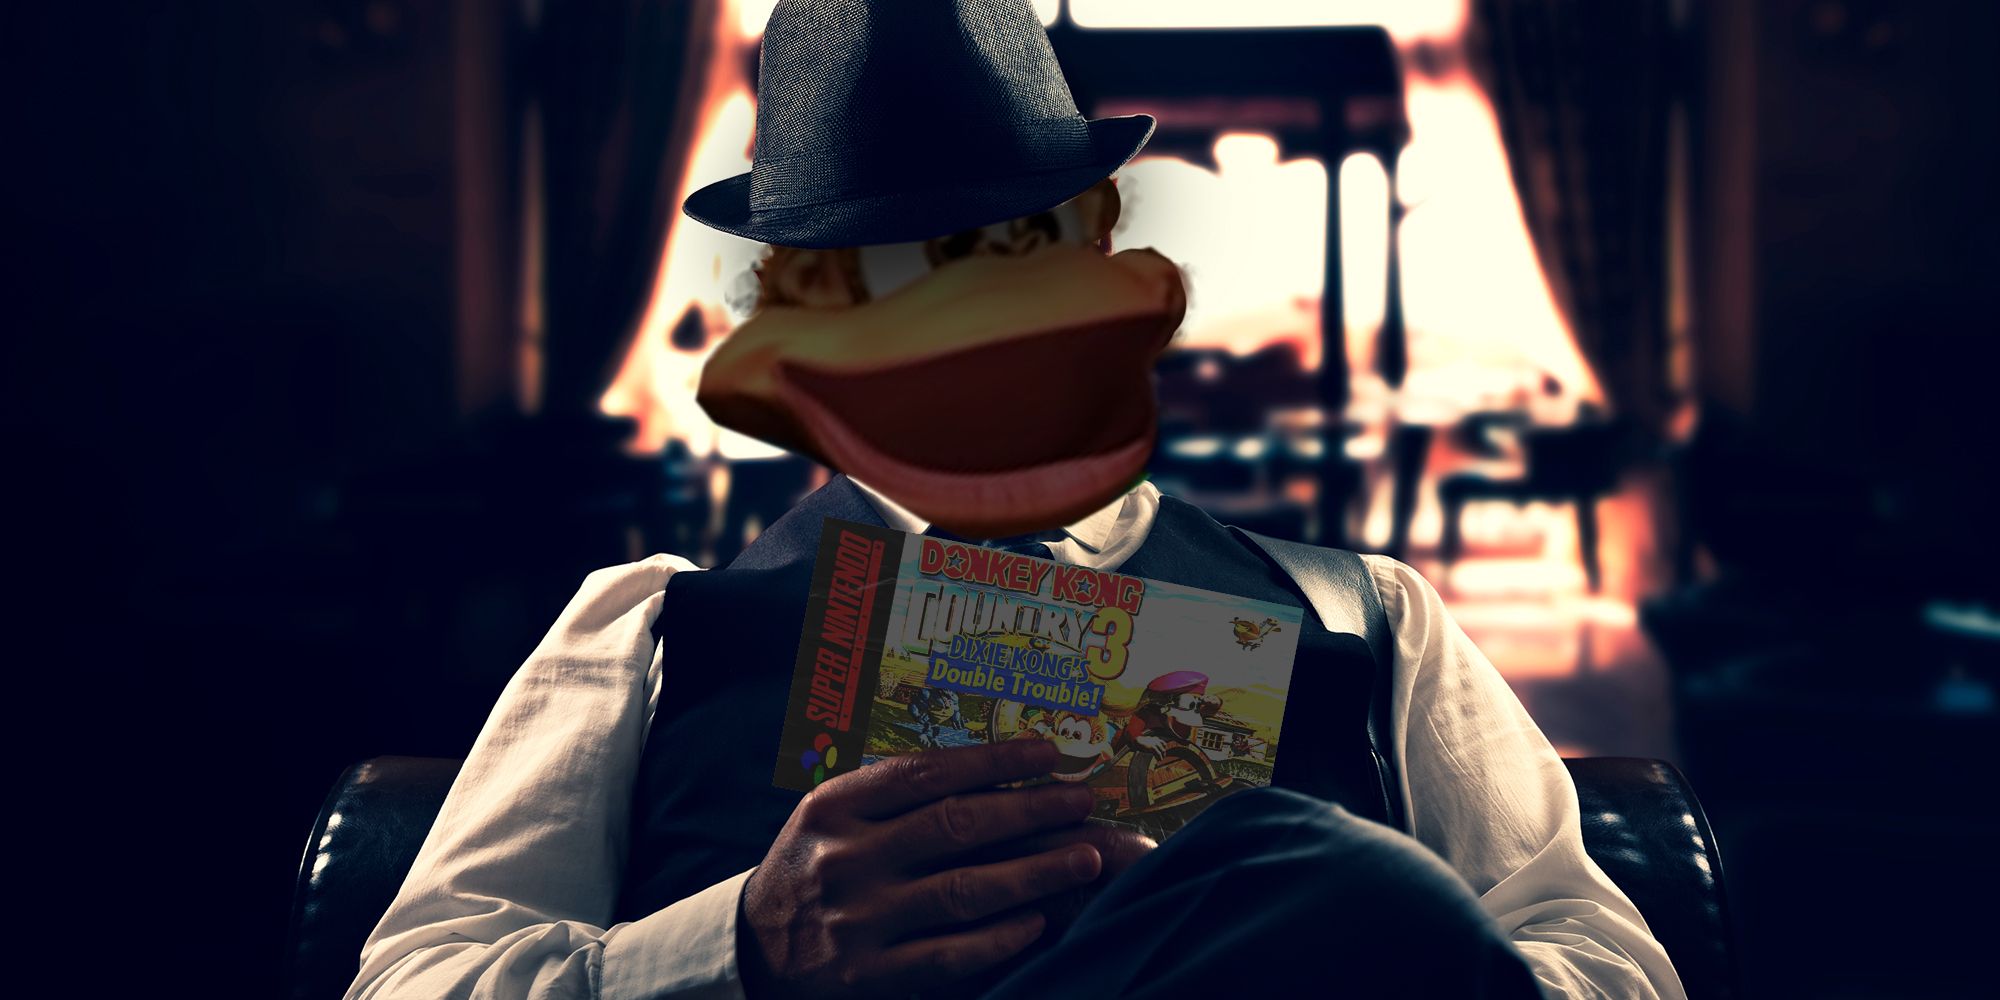 A picture showing Donkey Kong as a mob boss holding a copy of SNES classic Donkey Kong Country 3